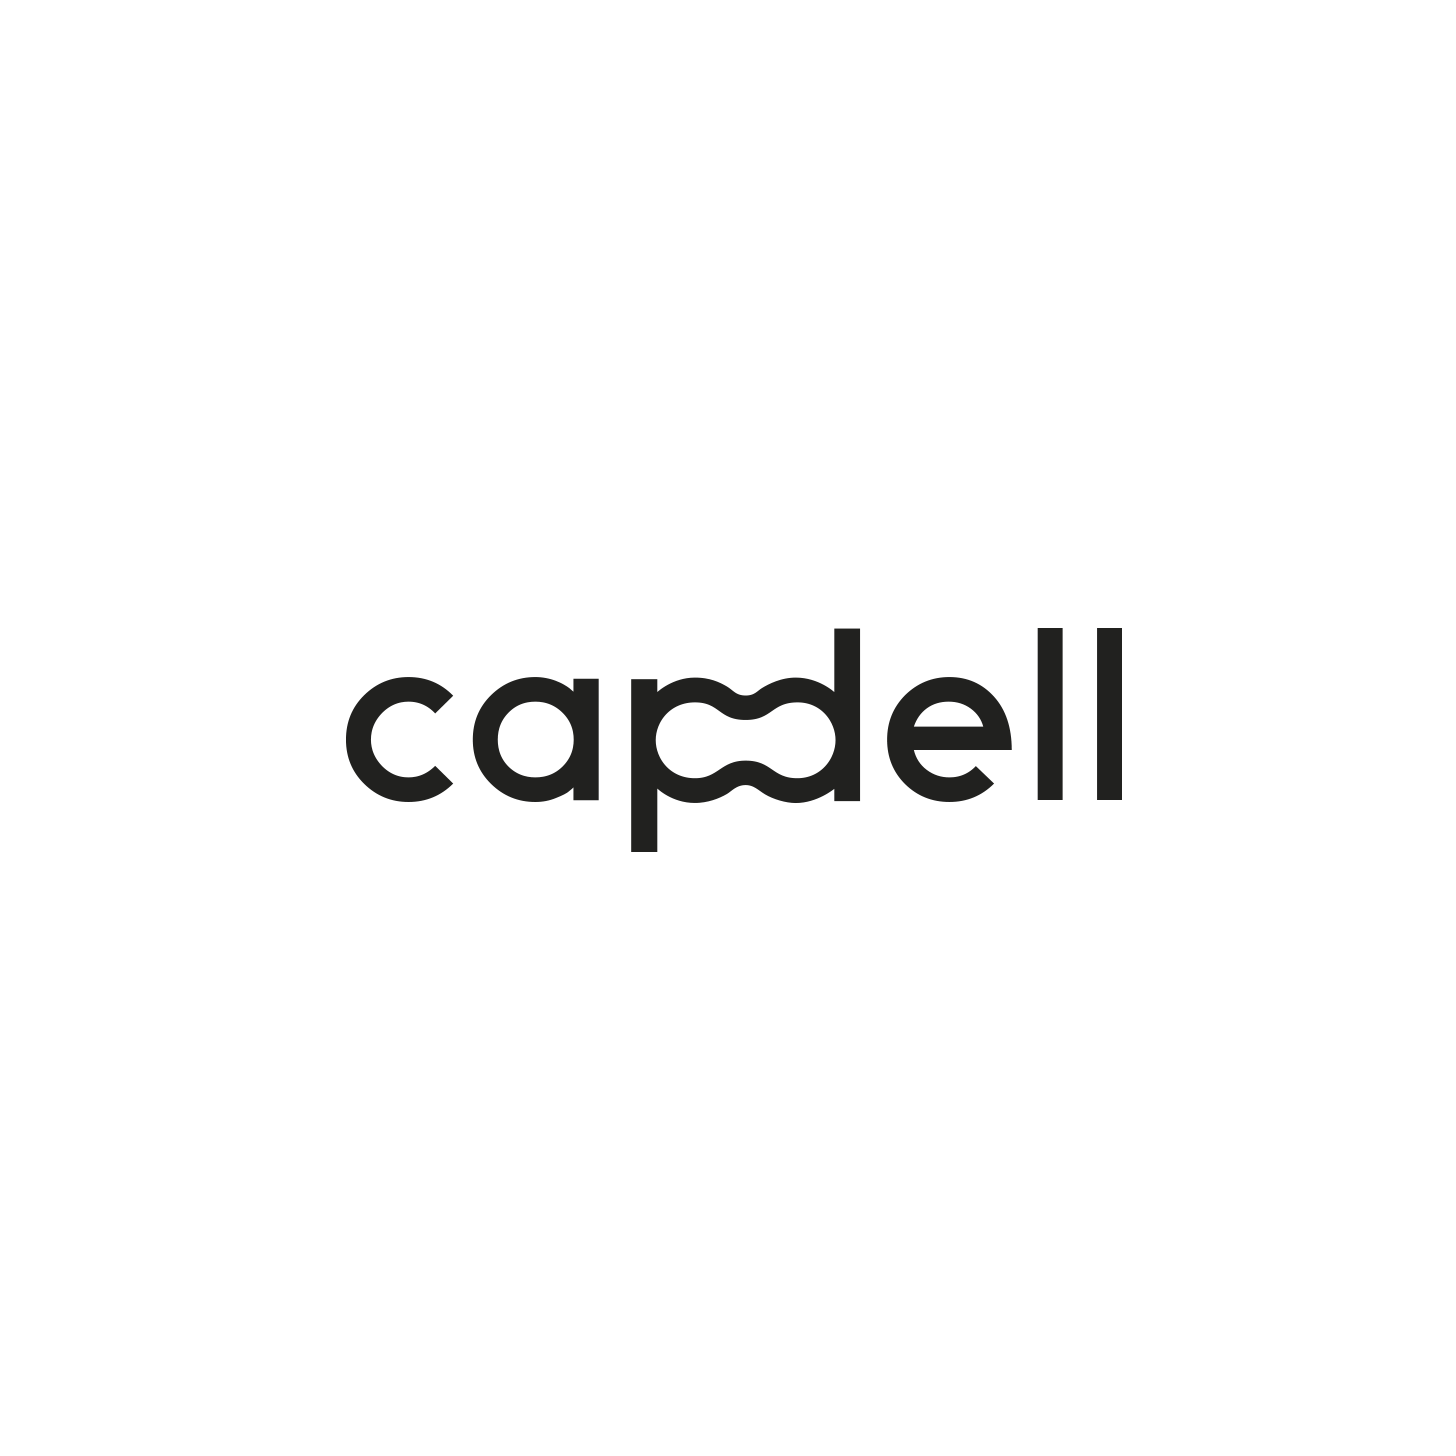 Capdell